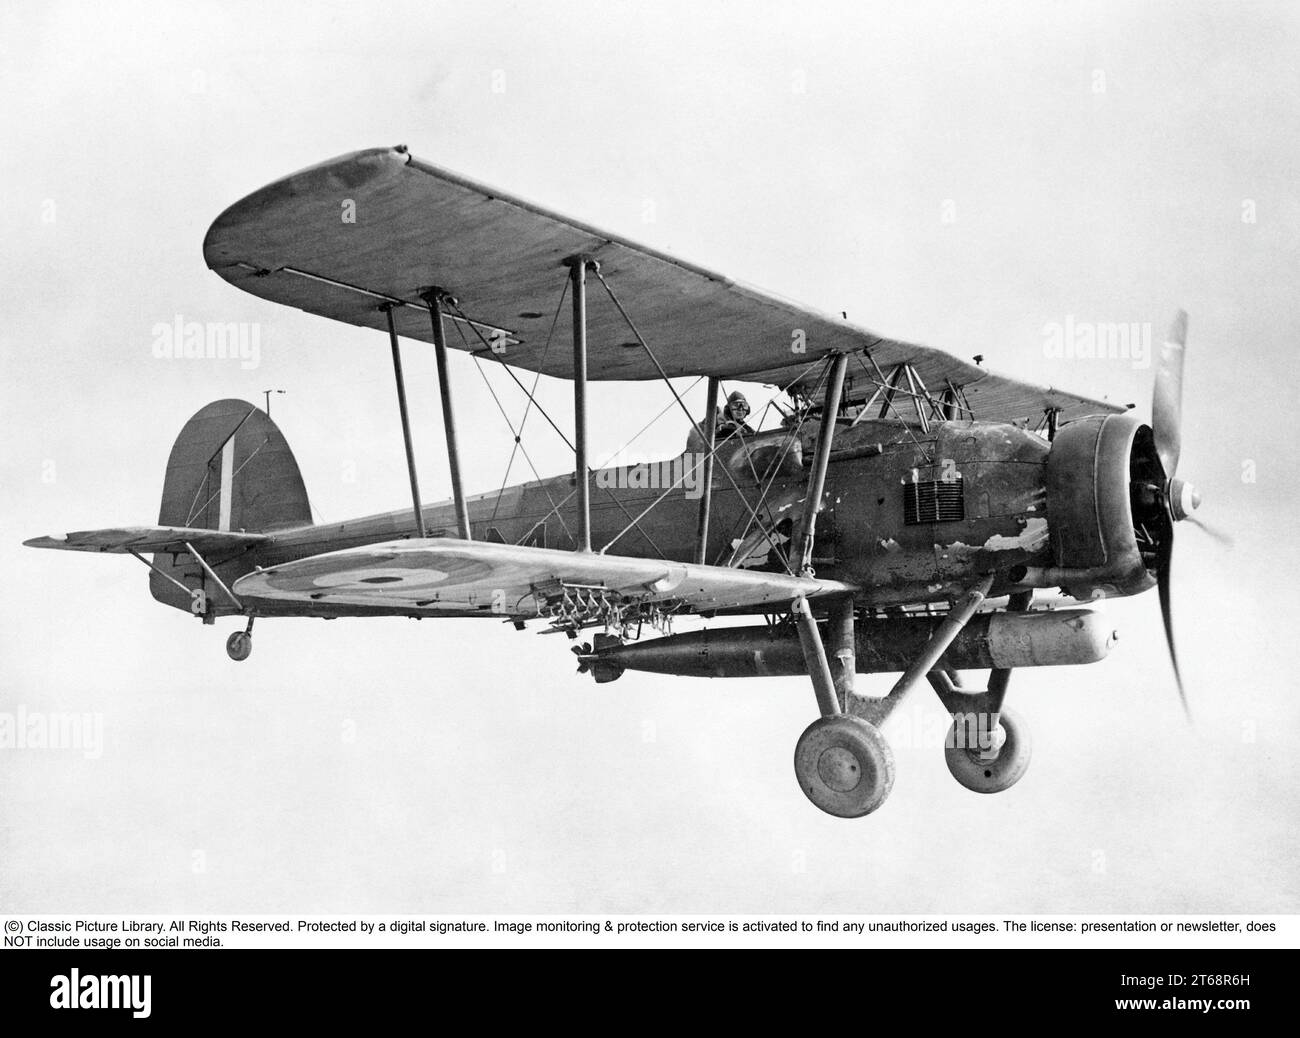 Fairey Swordfish Mk I with 785 Naval Air Squadron, Fleet Air Arm, 1939-45. The Fairey Swordfish was a biplane torpedo bomber, nicknamed “Stringbag,” that primarily served with the Fleet Air Arm (FAA) of the British Royal Navy during the Second World War. While outdated by 1939, the Swordfish went on to have an impressive wartime record, including sinking a larger tonnage of Axis shipping than any other Allied aircraft and famously playing a role in the sinking of the German battleship Bismarck. Stock Photo